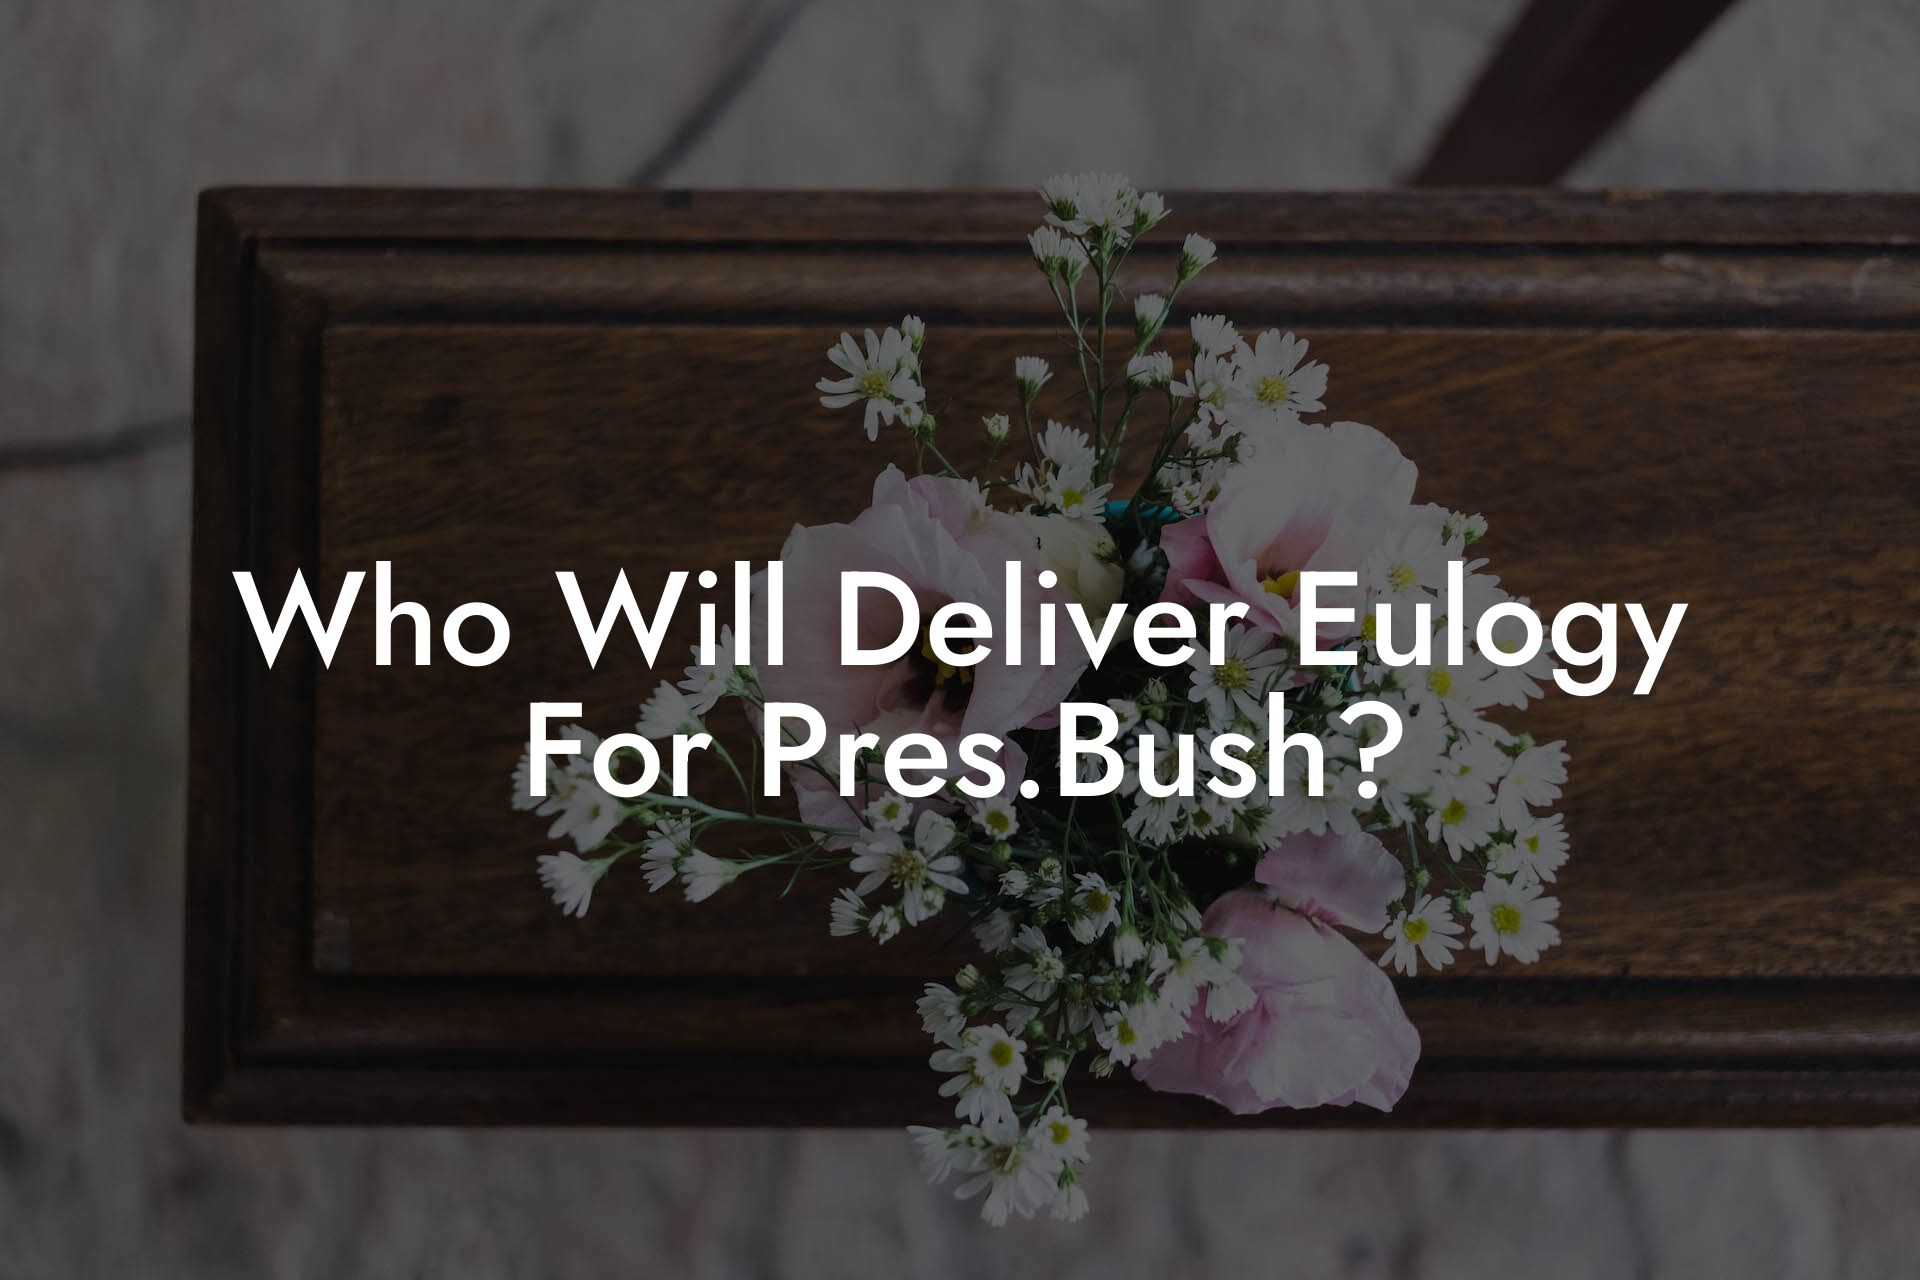 Who Will Deliver Eulogy For Pres.Bush?